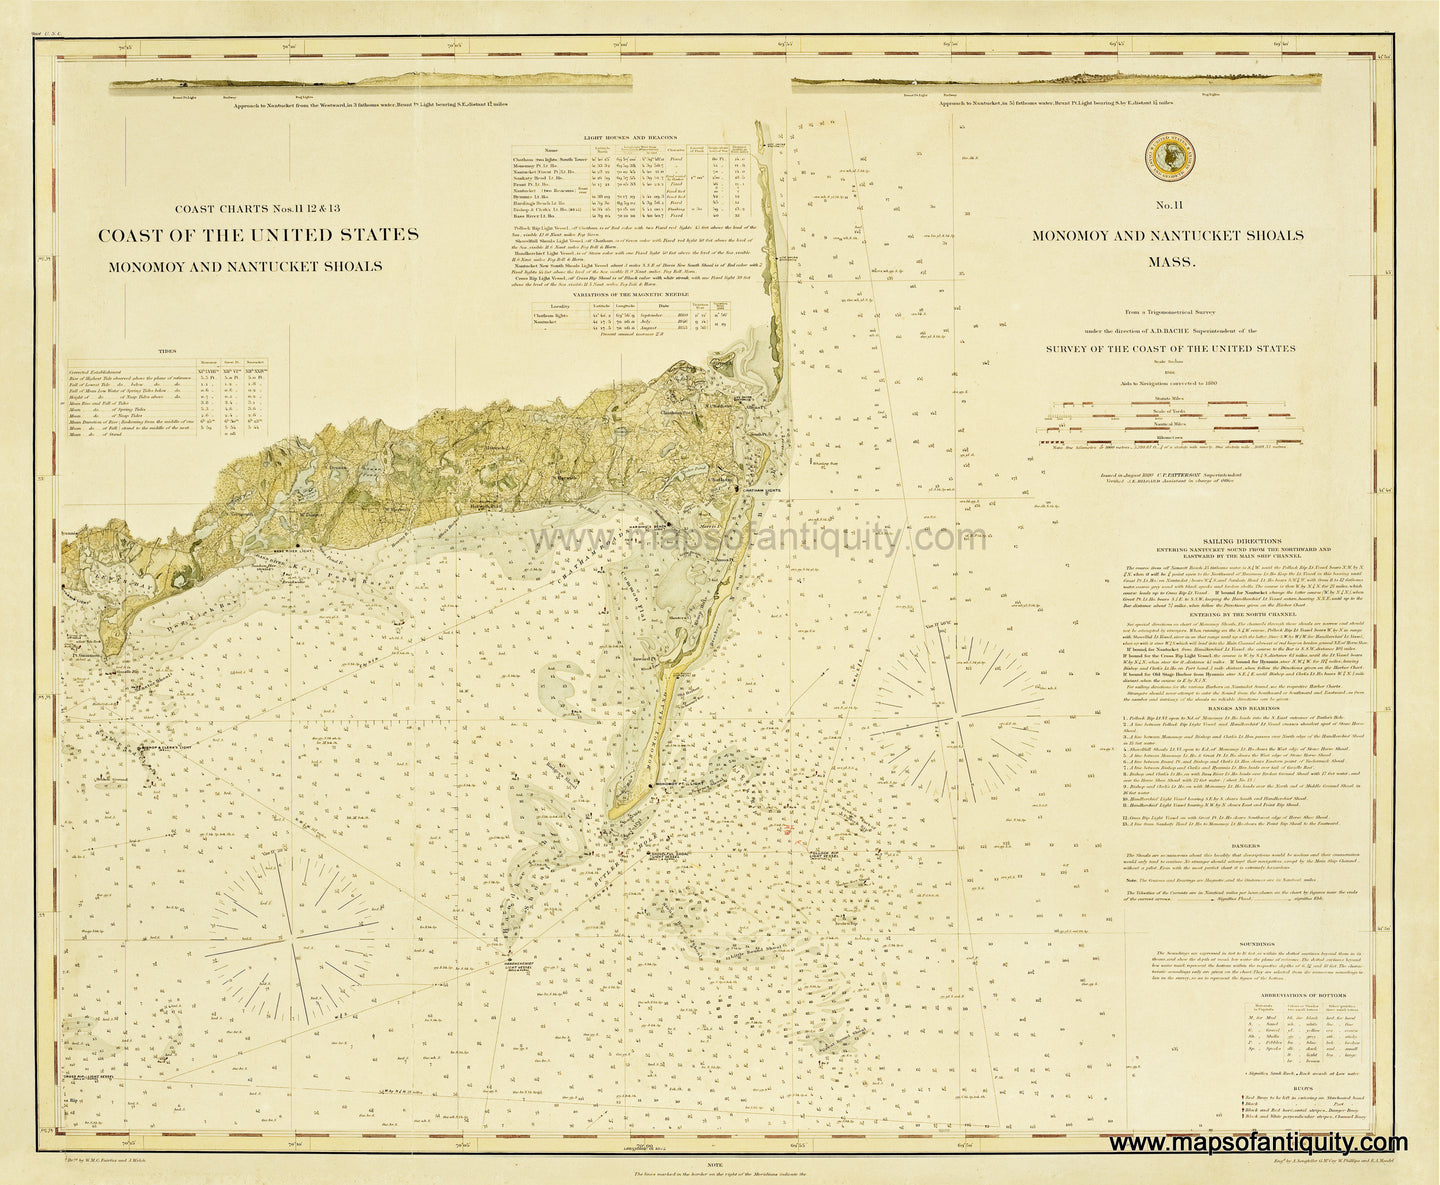 Chatham and Monomoy Chart - Reproduction